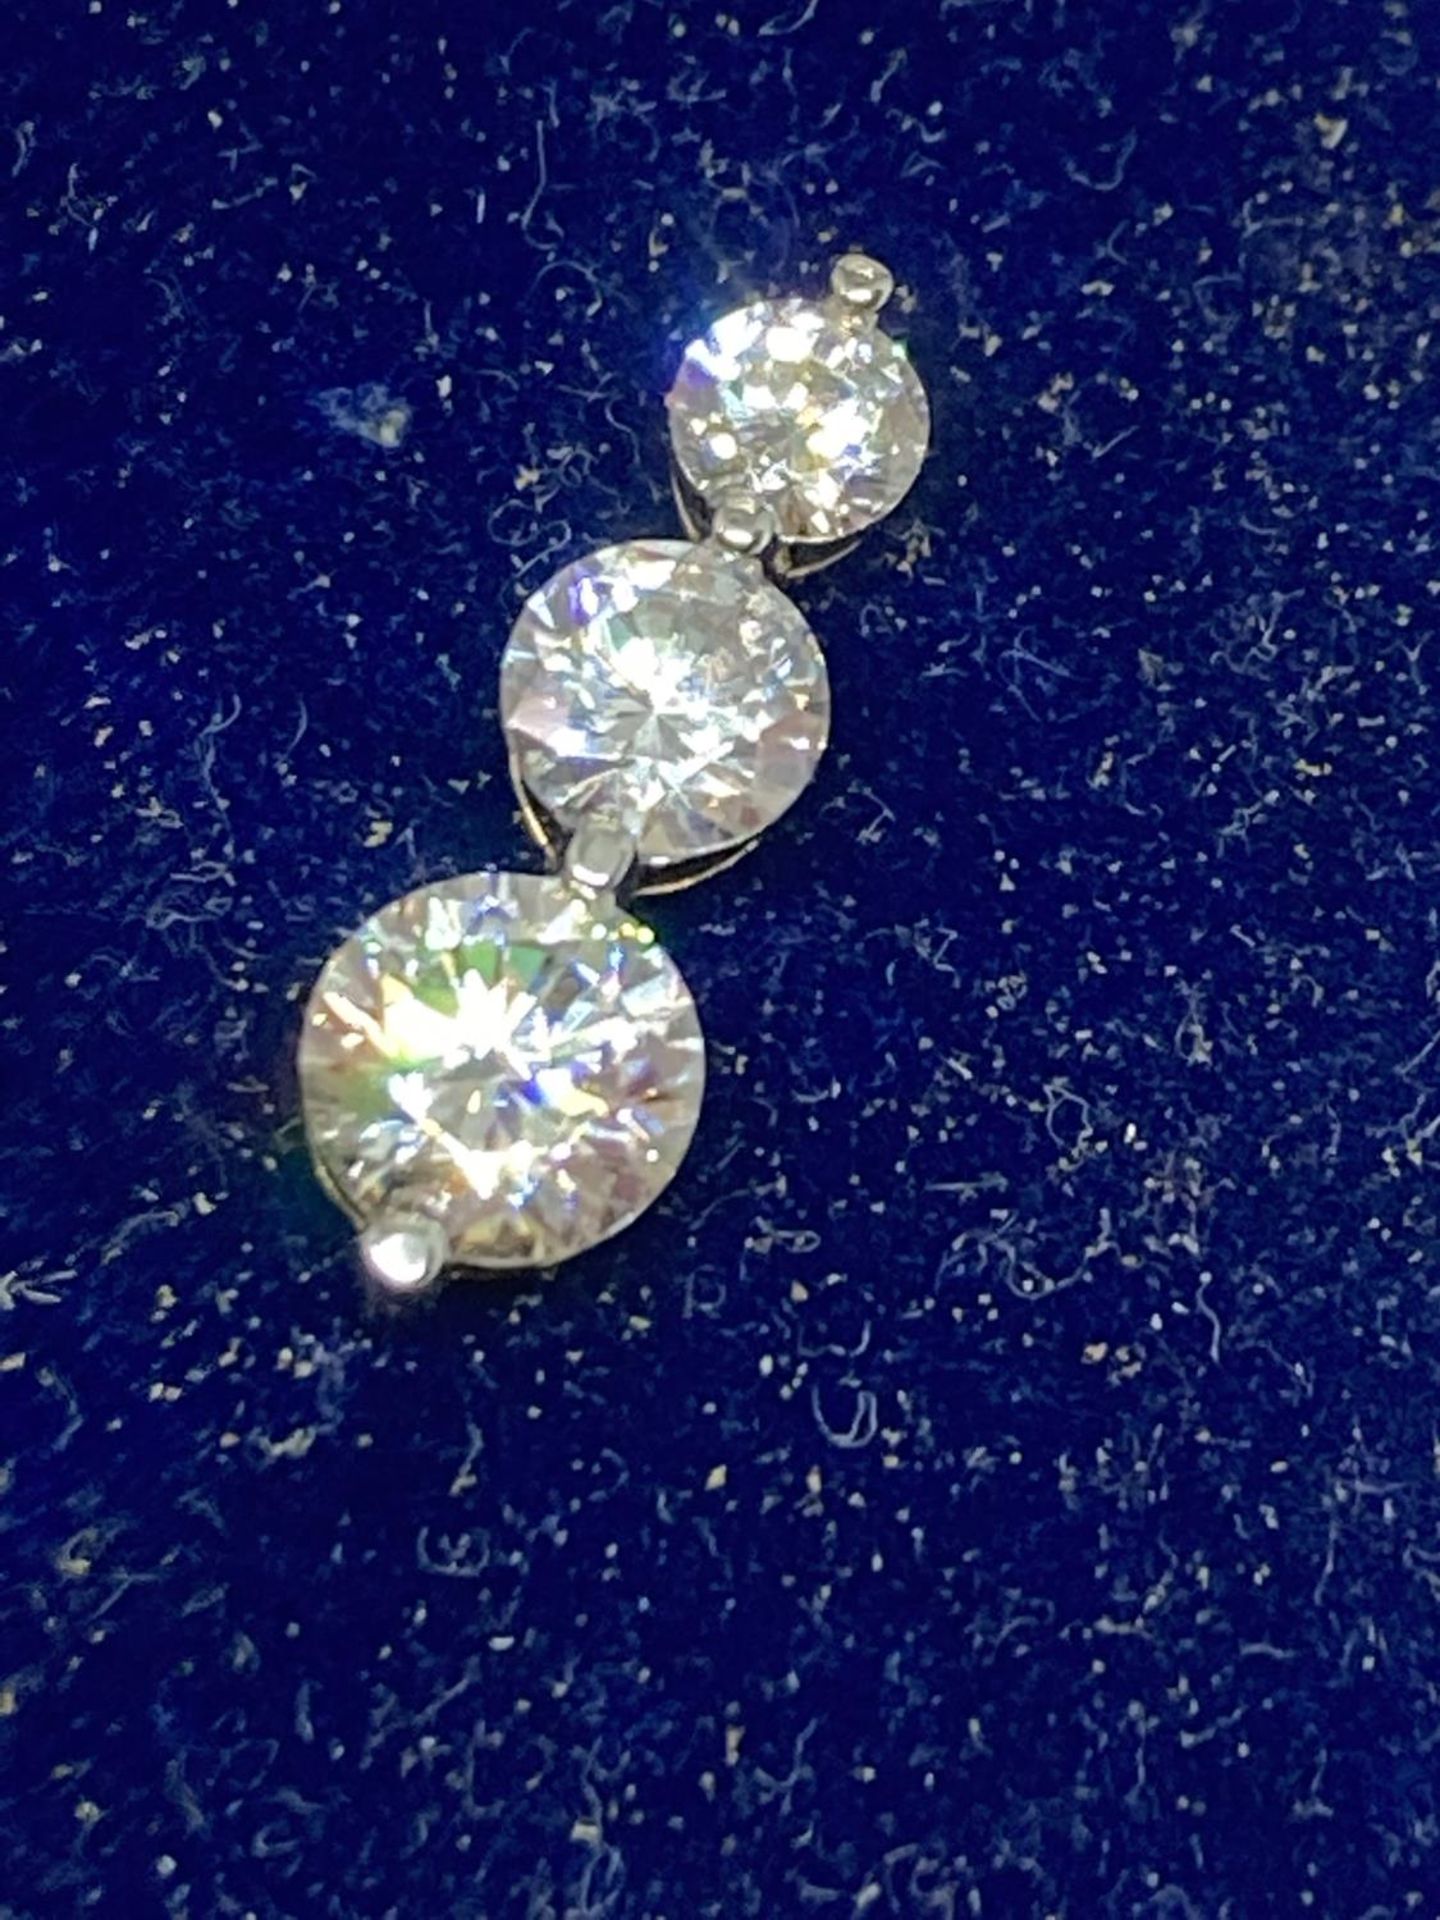 A SILVER CUBIC ZIRCONIA PENDANT AND EARRING SET IN A PRESENTATION BOX - Image 3 of 3